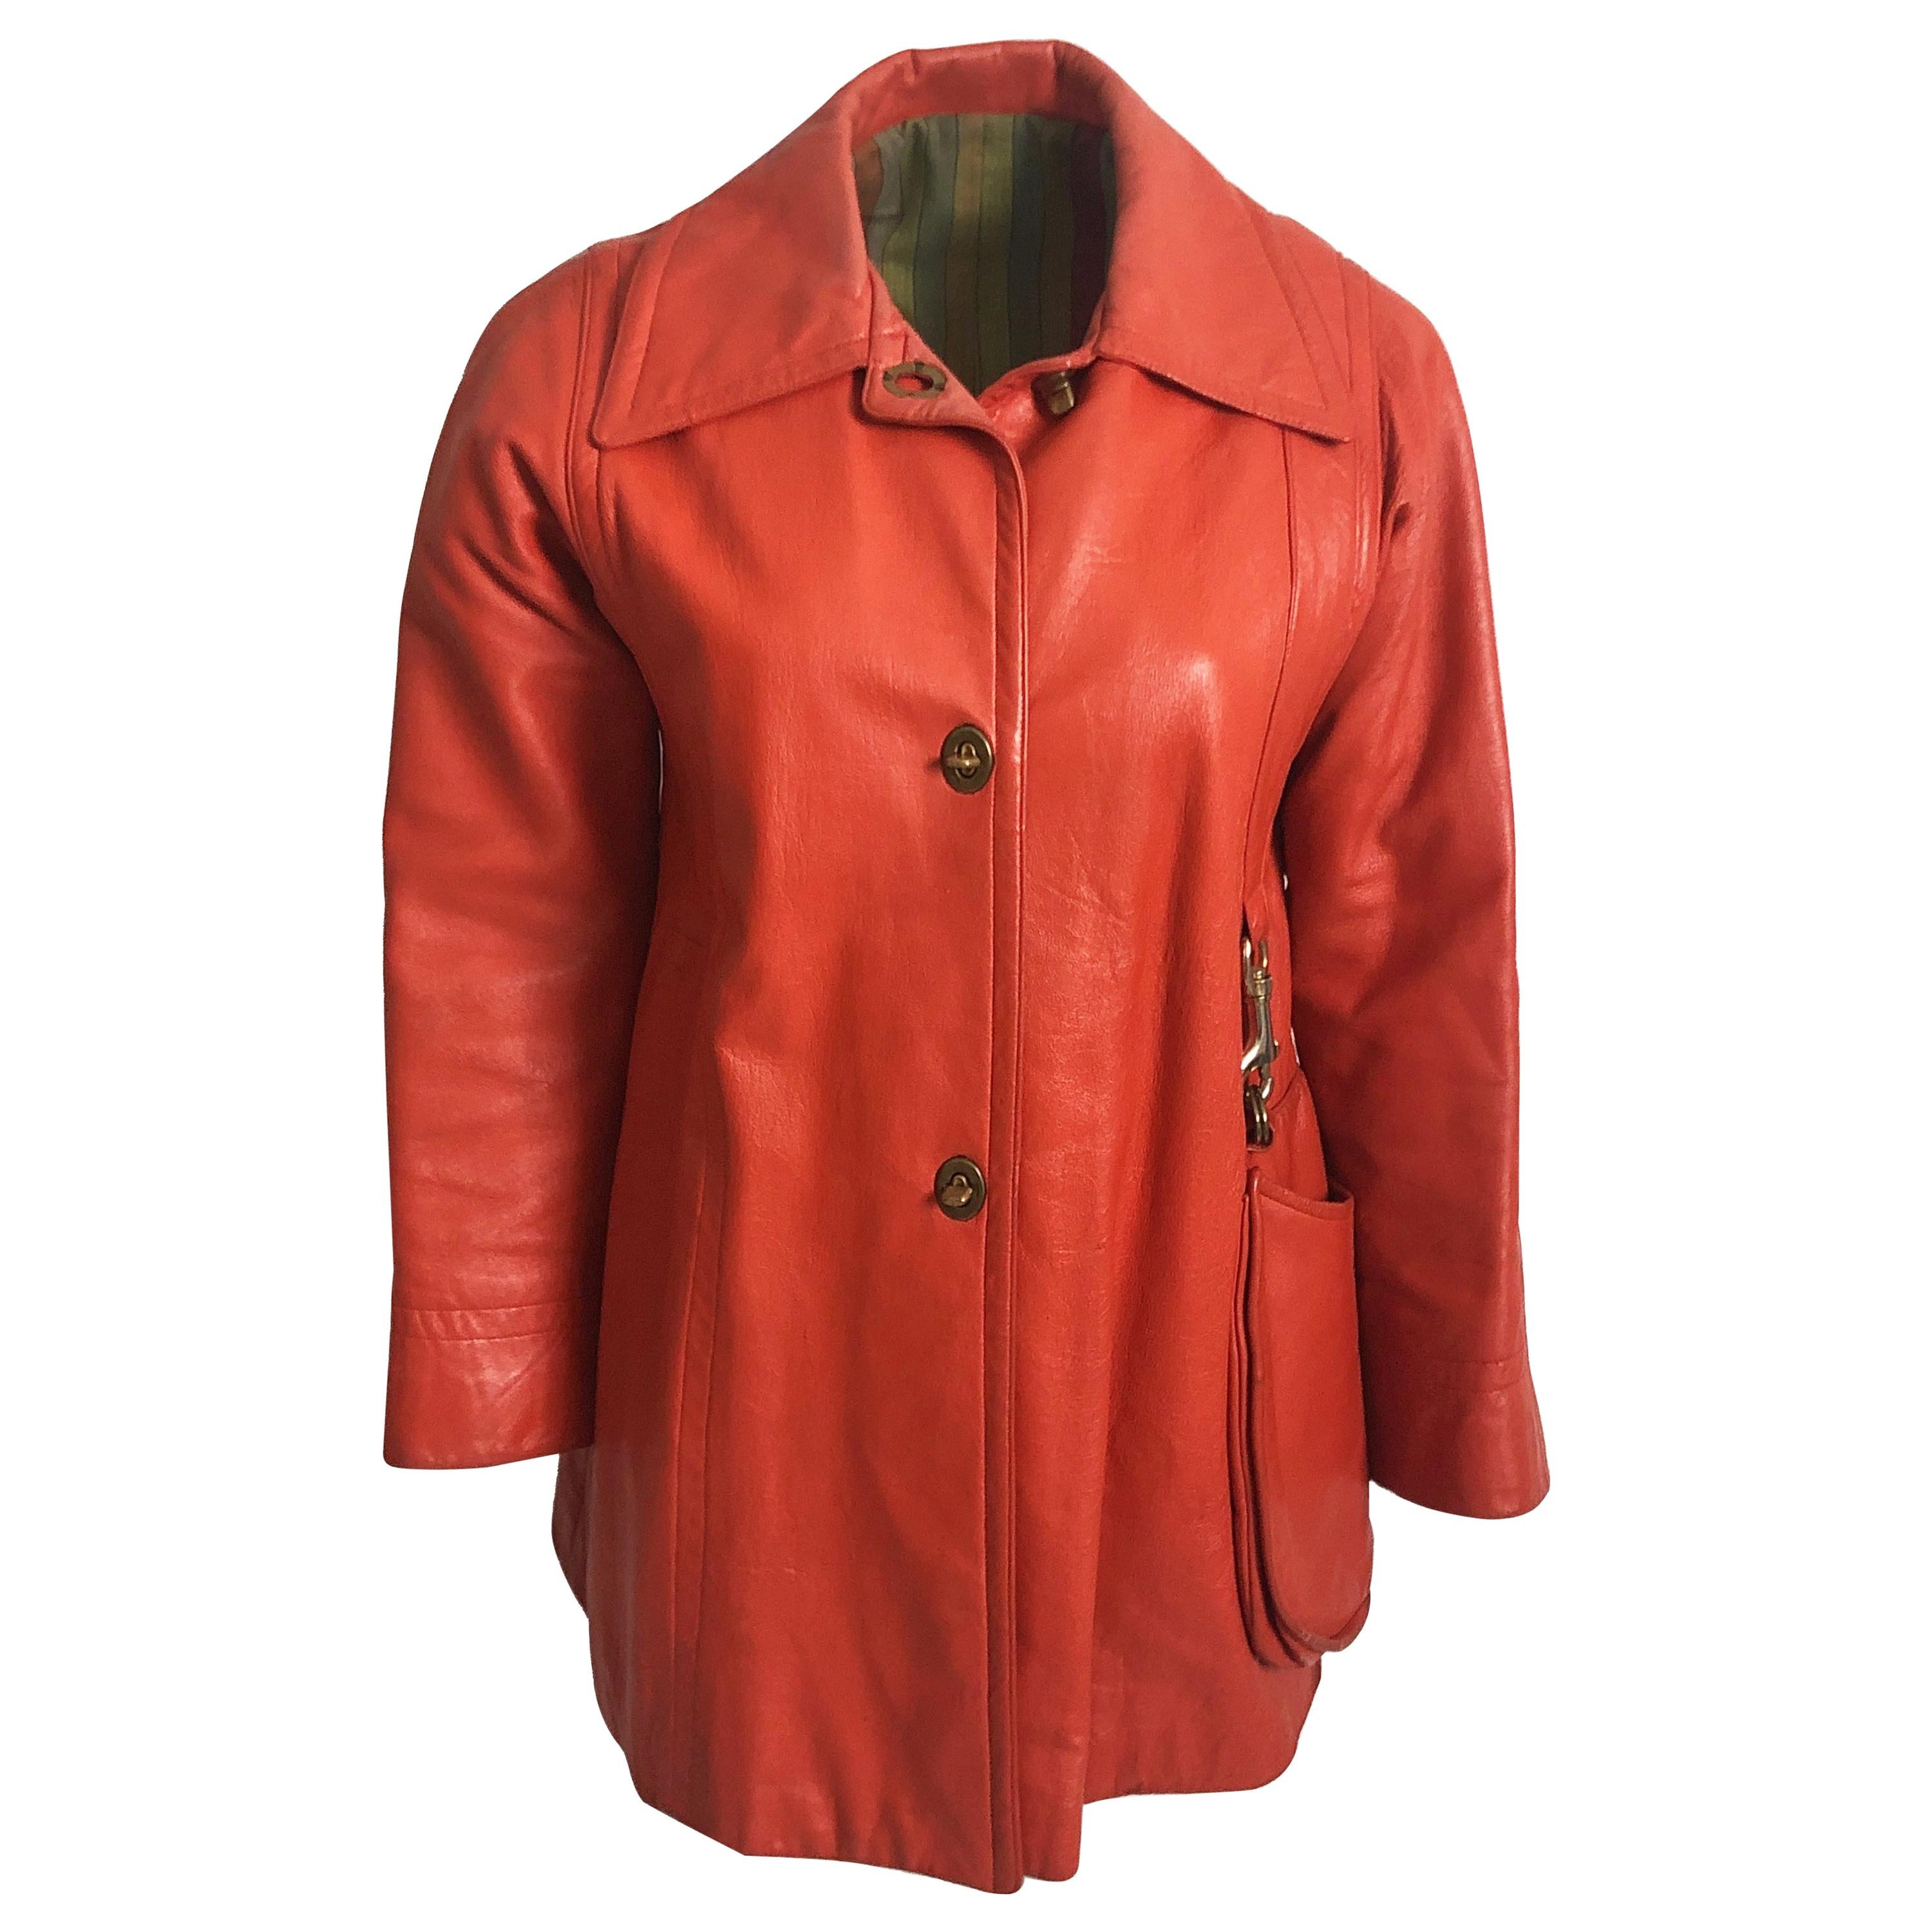 Vintage 60s Bonnie Cashin for Sills tomato red (orange hued tone) leather jacket with attached hobo bag, likely made in the 1960s.  

A super rare piece from the mother of American sportswear, Bonnie Cashin.  Known for her practical, yet stylish